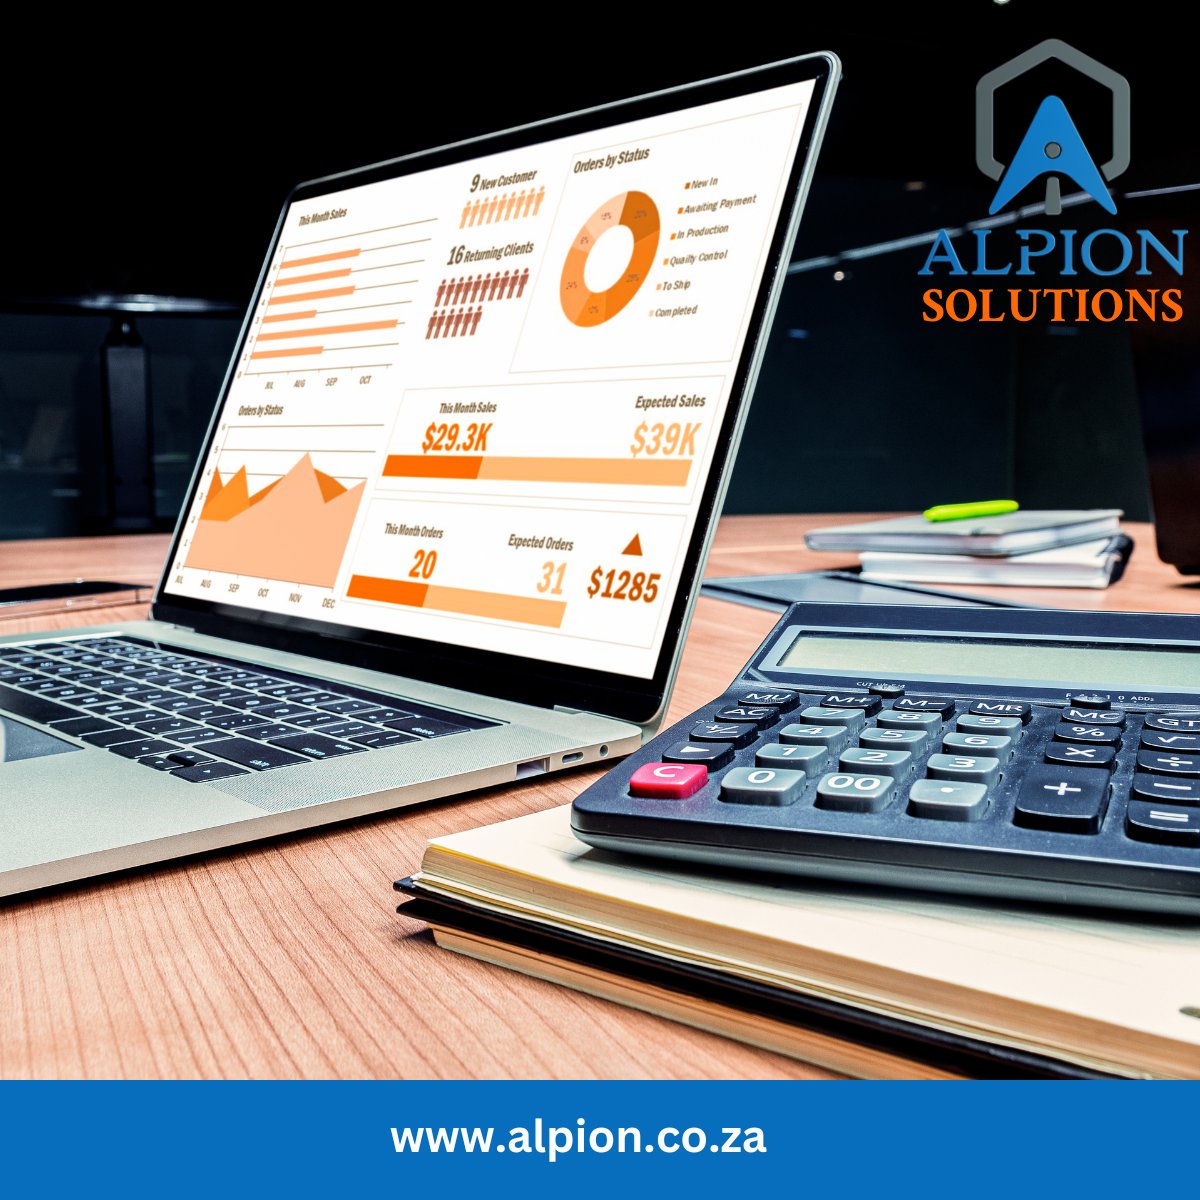 Experience streamlined payroll with Alpion Solutions. Our cloud-based outsourcing offers unparalleled security and customization. #EfficientPayroll #AlpionSecurity #AlpionSolutions